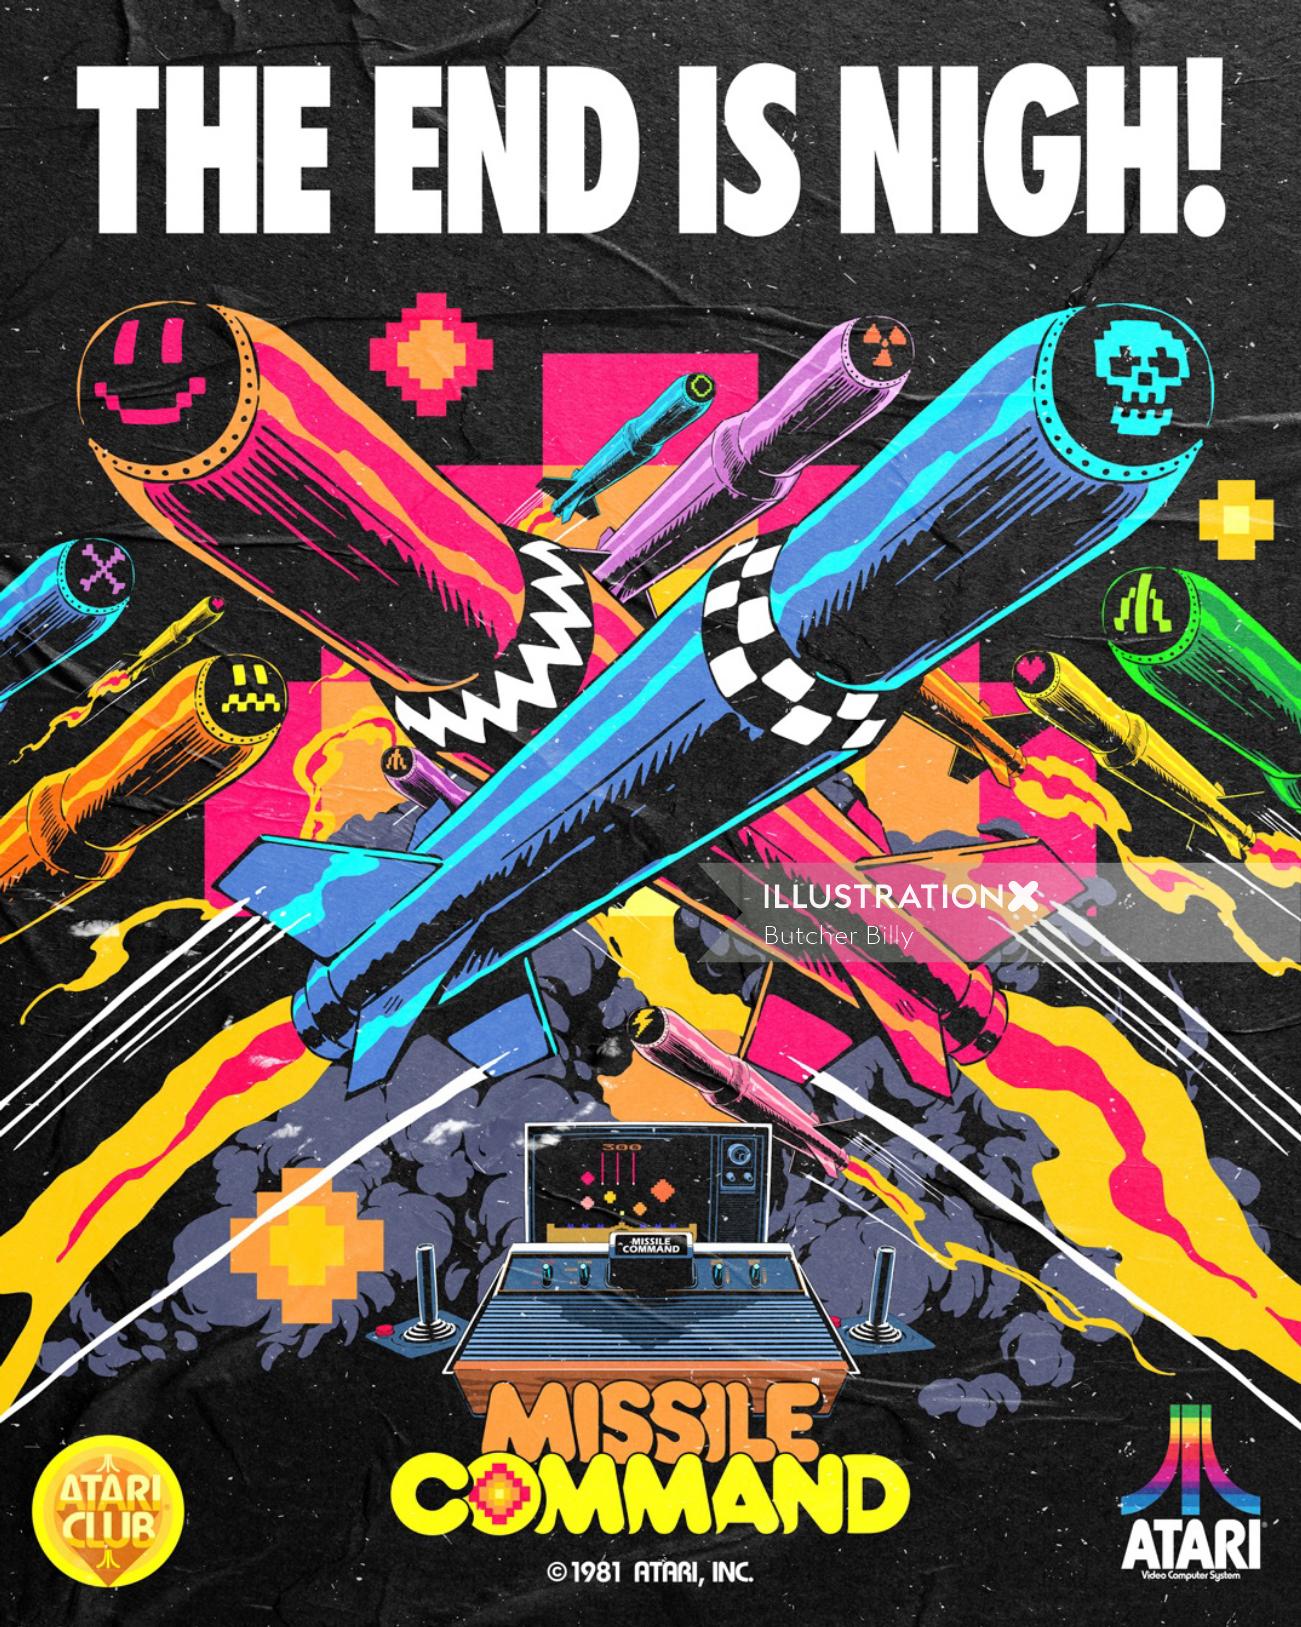 The End is Night! - Missile Command nft art